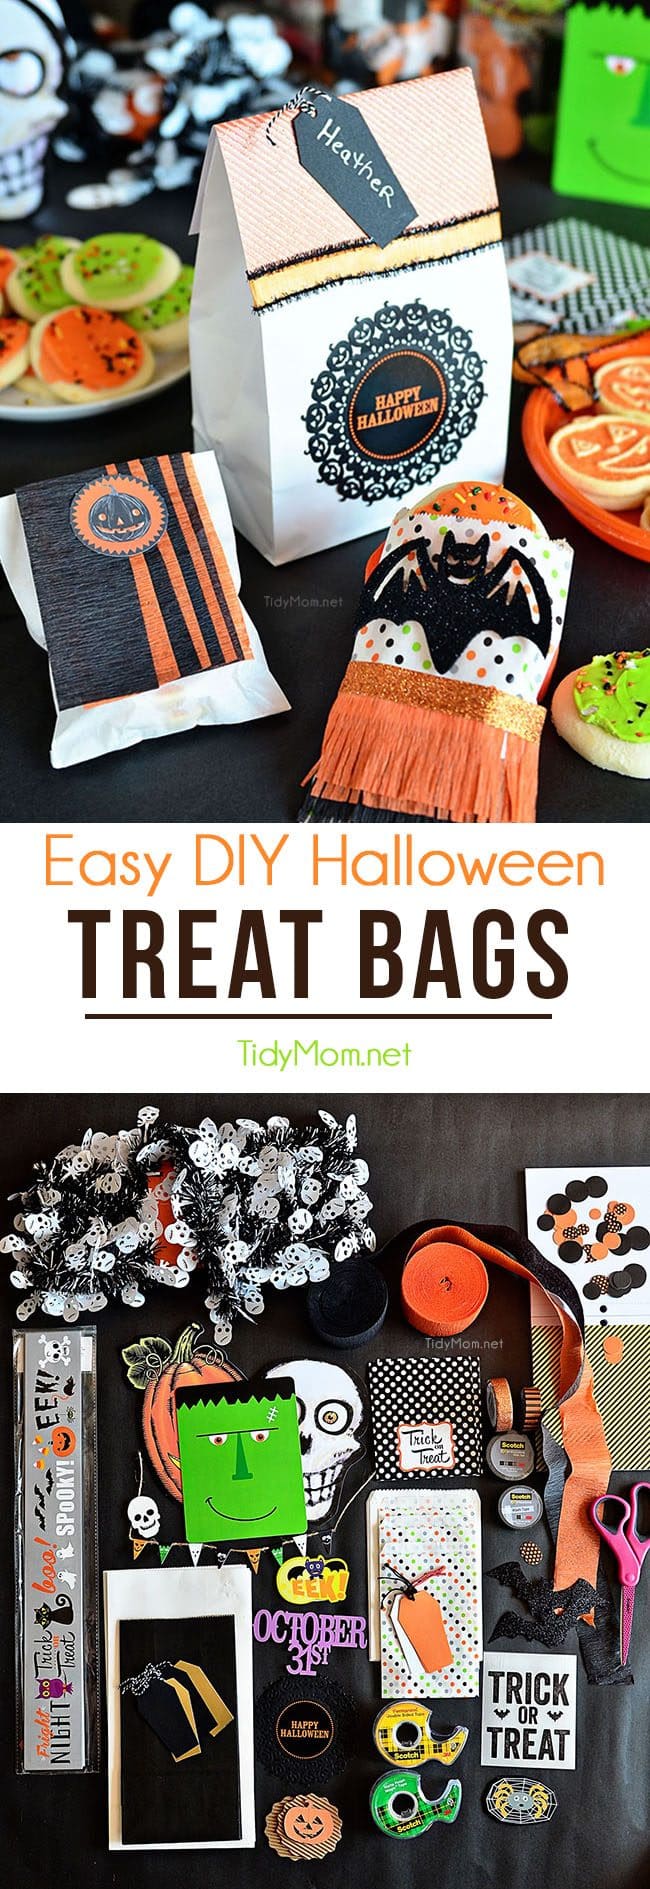 DIY Halloween Treat Bags. Perfect for cookies, candy or halloween favors to pass out to trick-or-treaters or Halloween party guests. Details on how to make 3 different Halloween treat bags at TidyMom.net